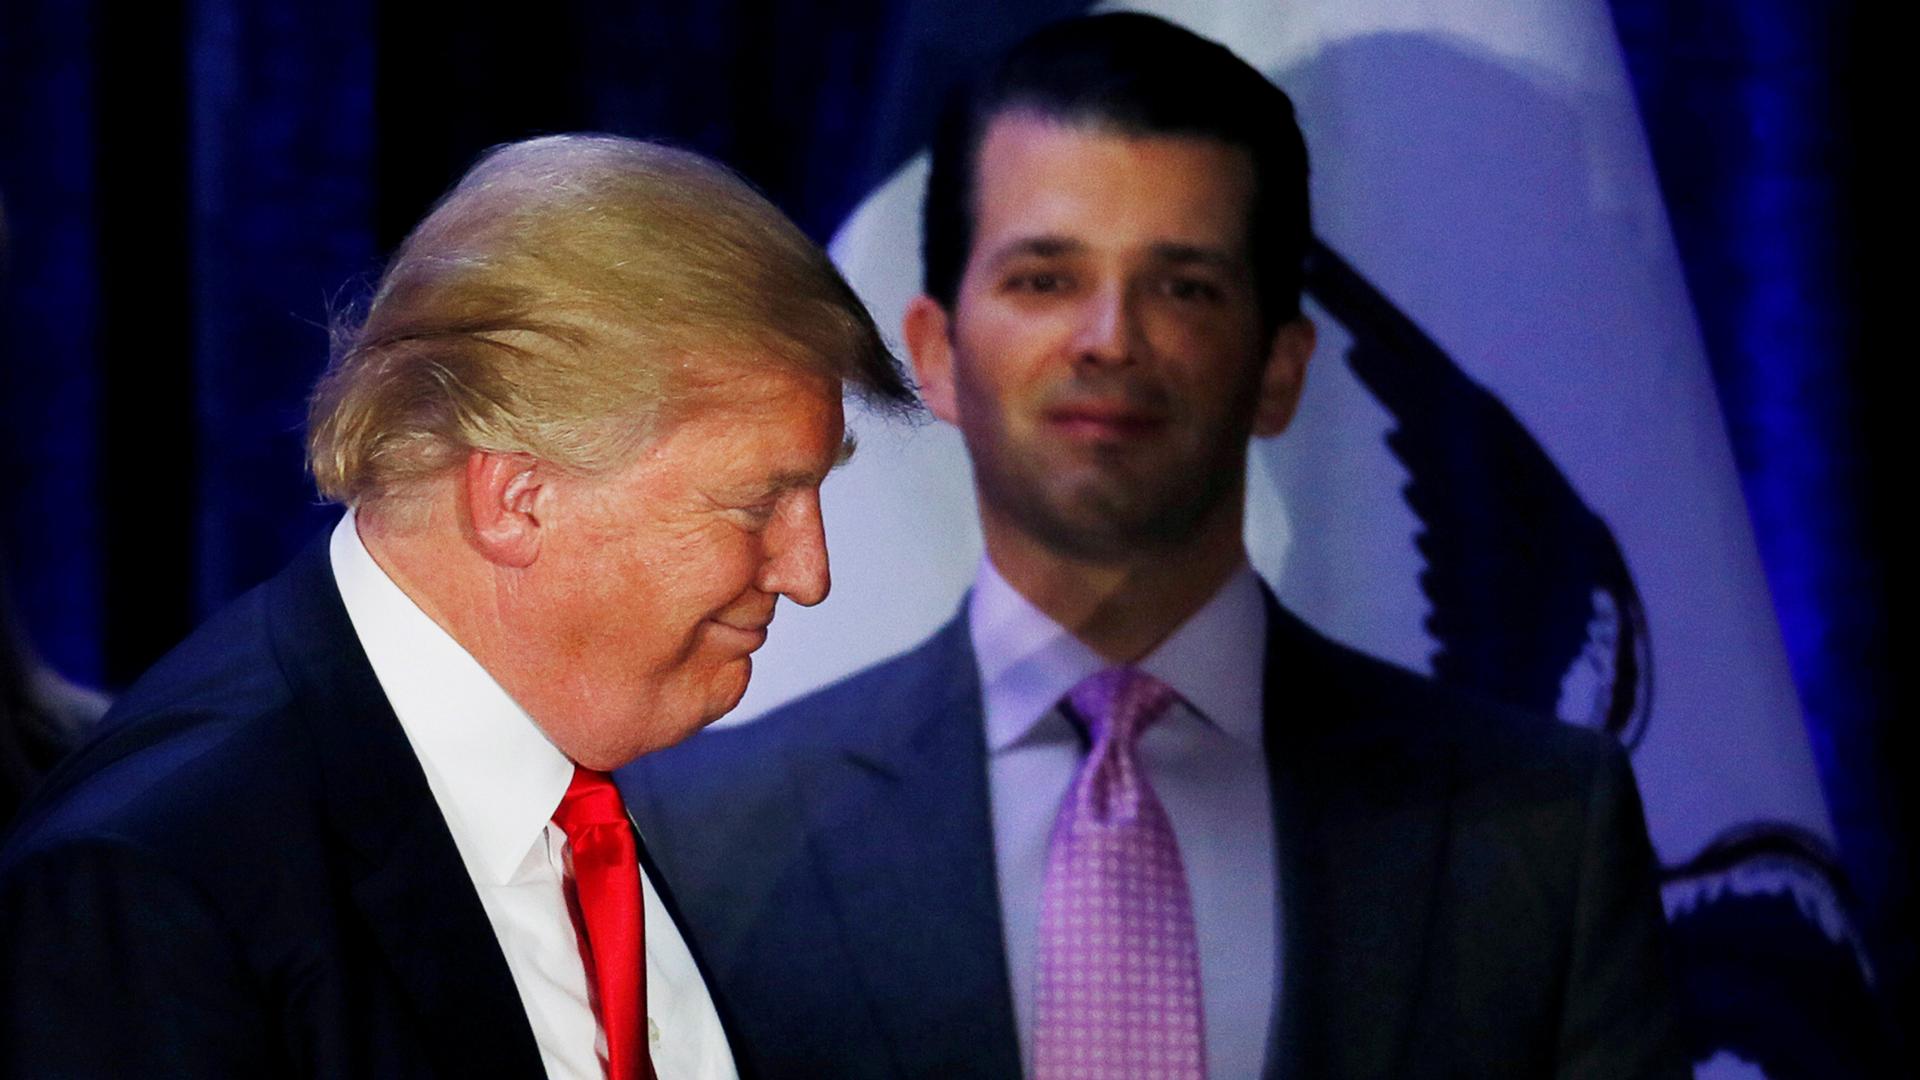 Donald Trump Jr. stands profile in the background watch his father exit the stage left.